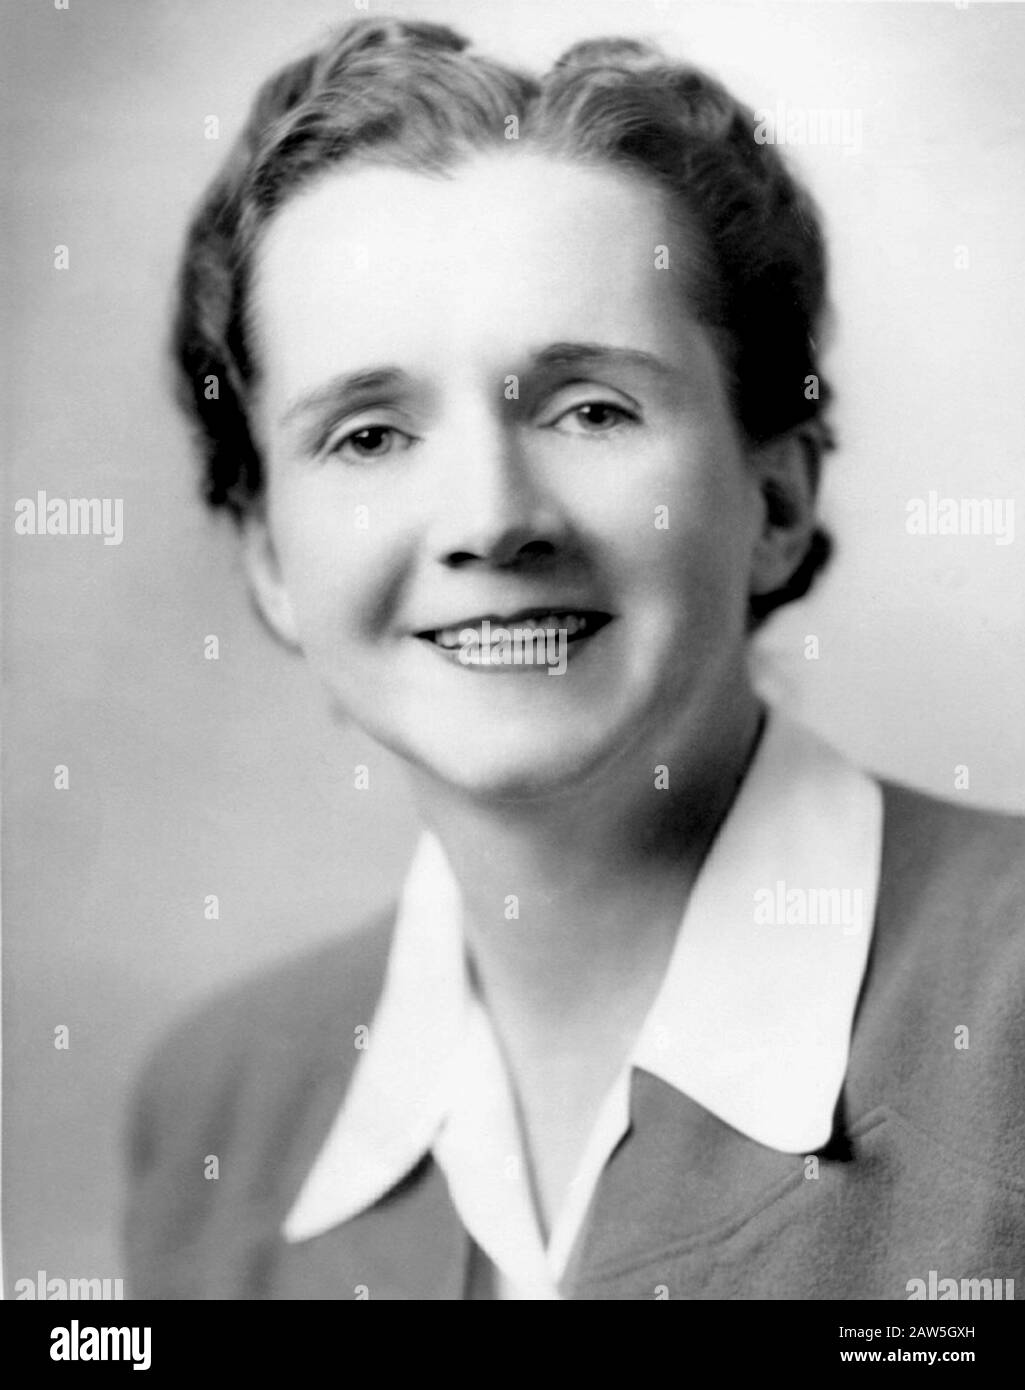 1944 , USA : The american Marine biologist and zoologist  RACHEL Louise CARSON ( 1907 - 1964 ) as an employee of the U.S. Fish and Wildlife Service . Stock Photo